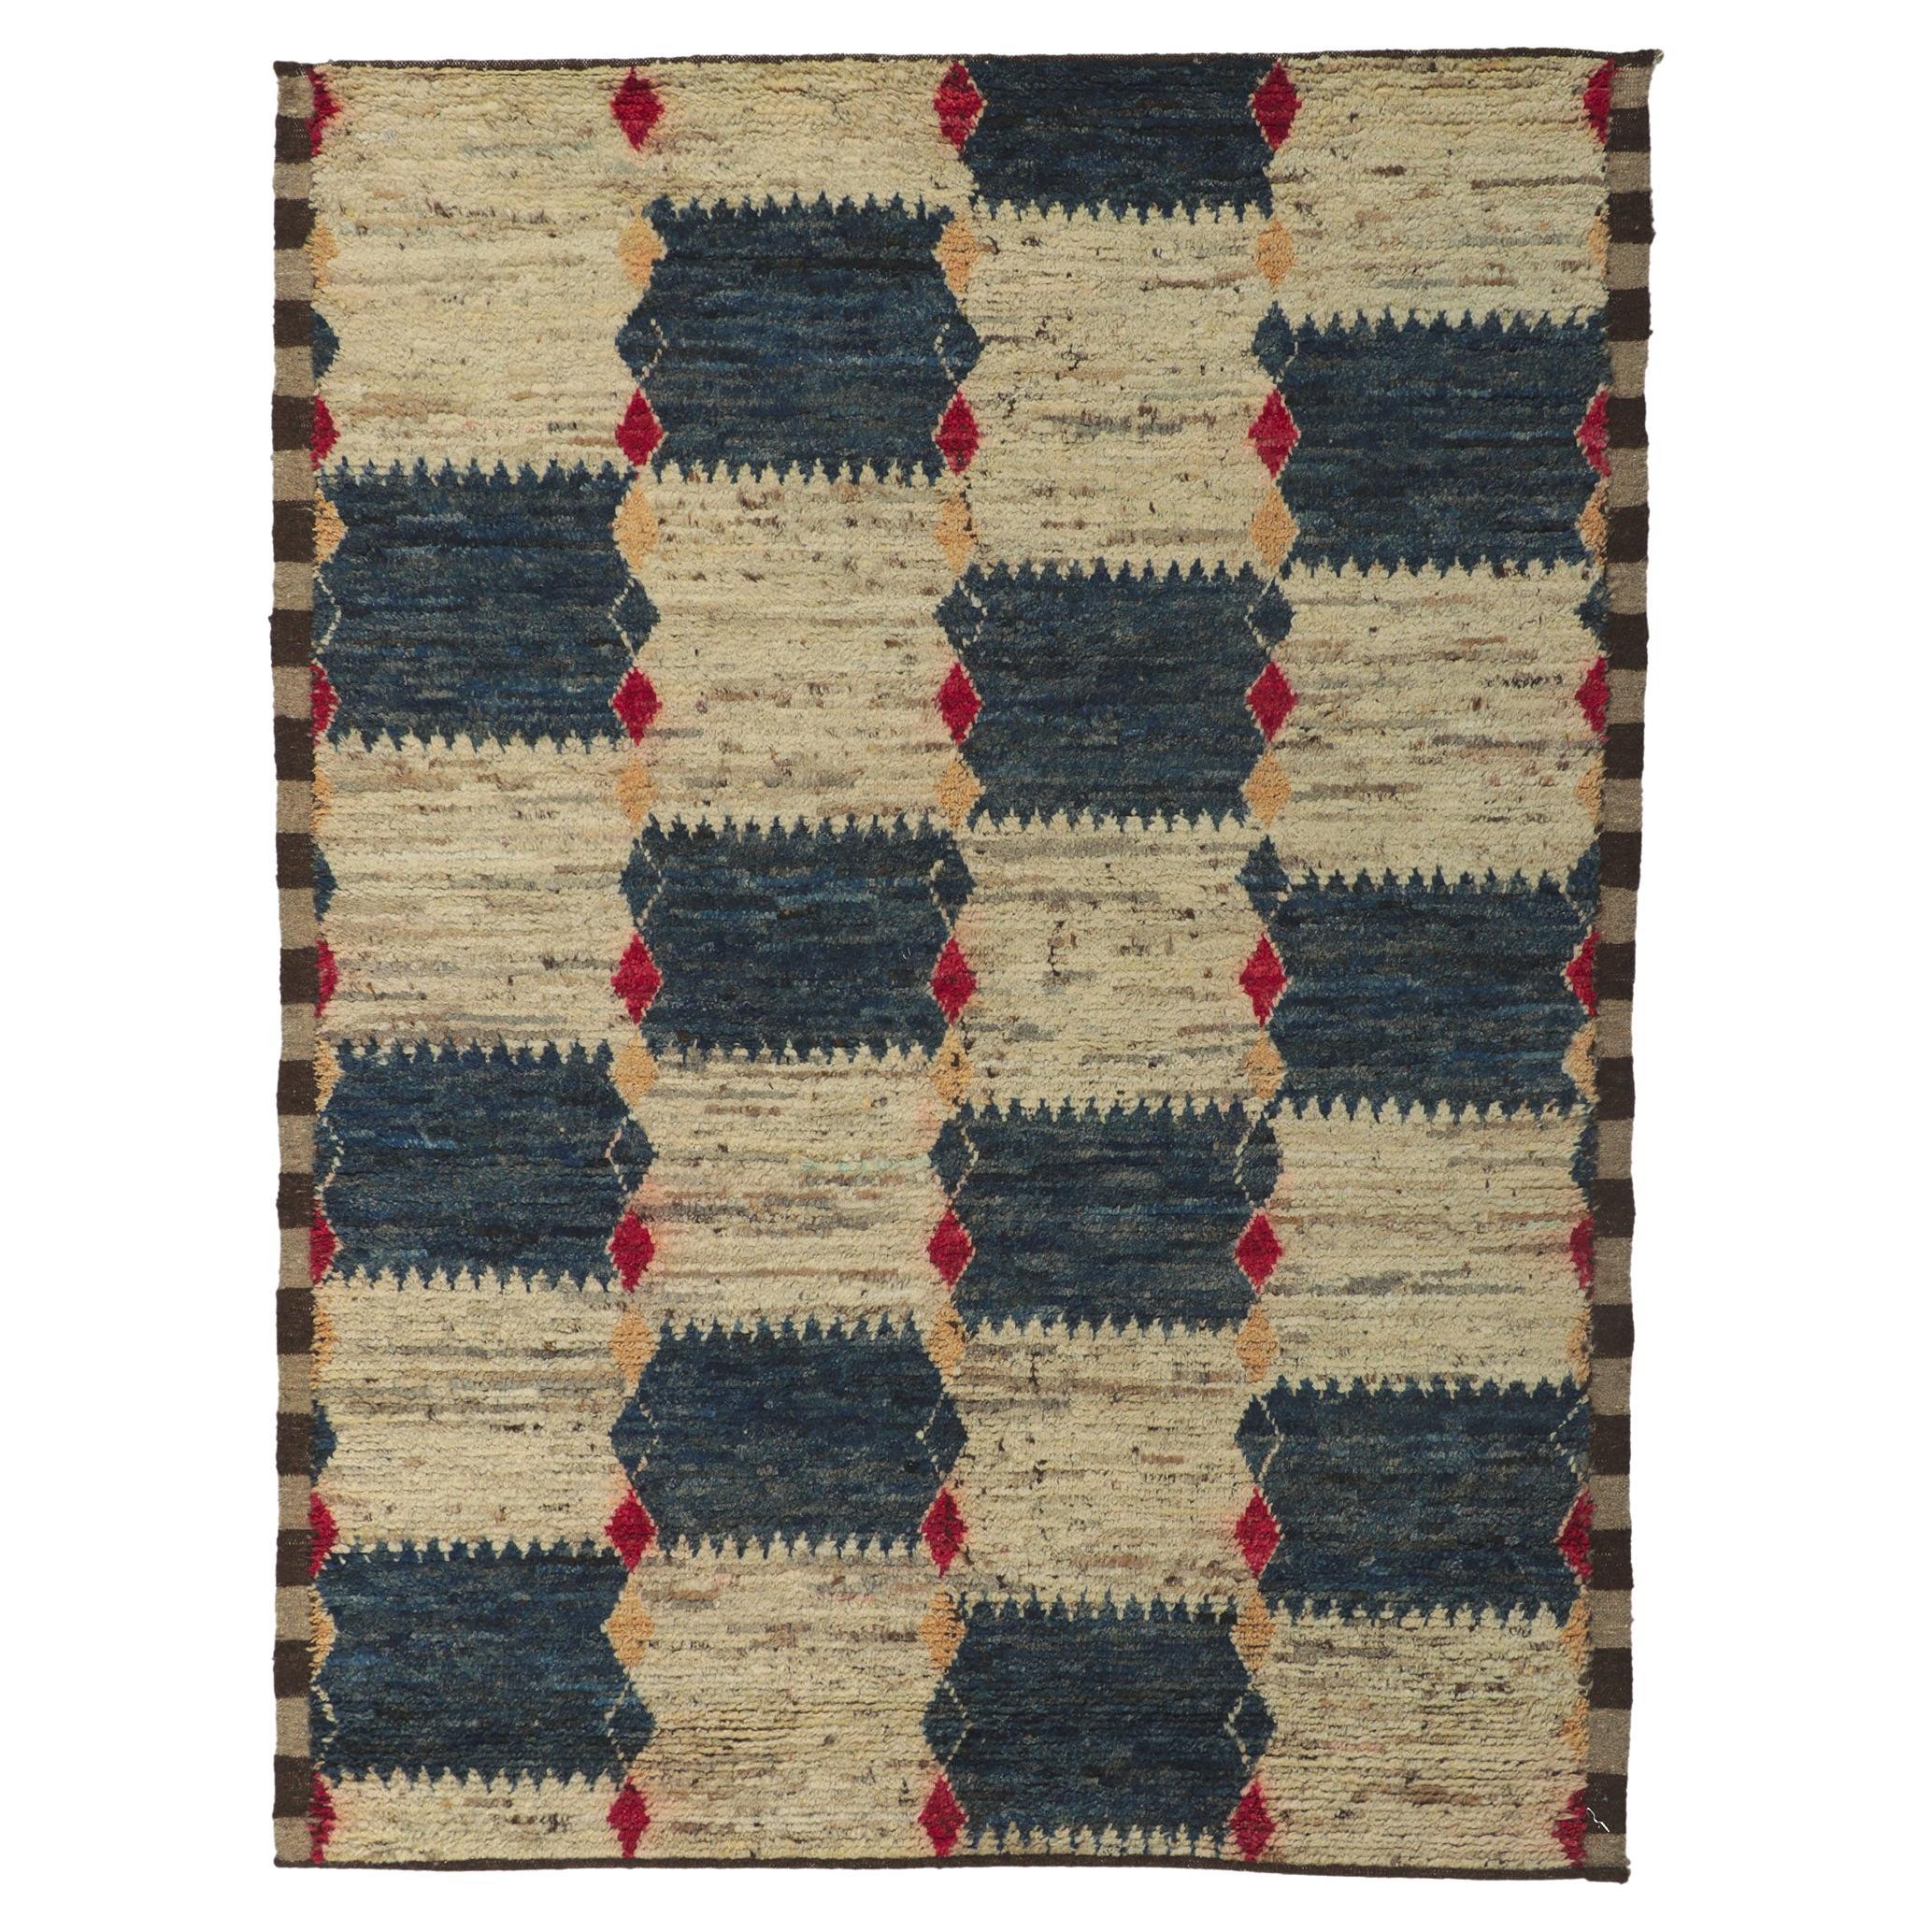 Earth-tone Checkered Moroccan Rug, Midcentury Modern Meets Tribal Enchantment For Sale